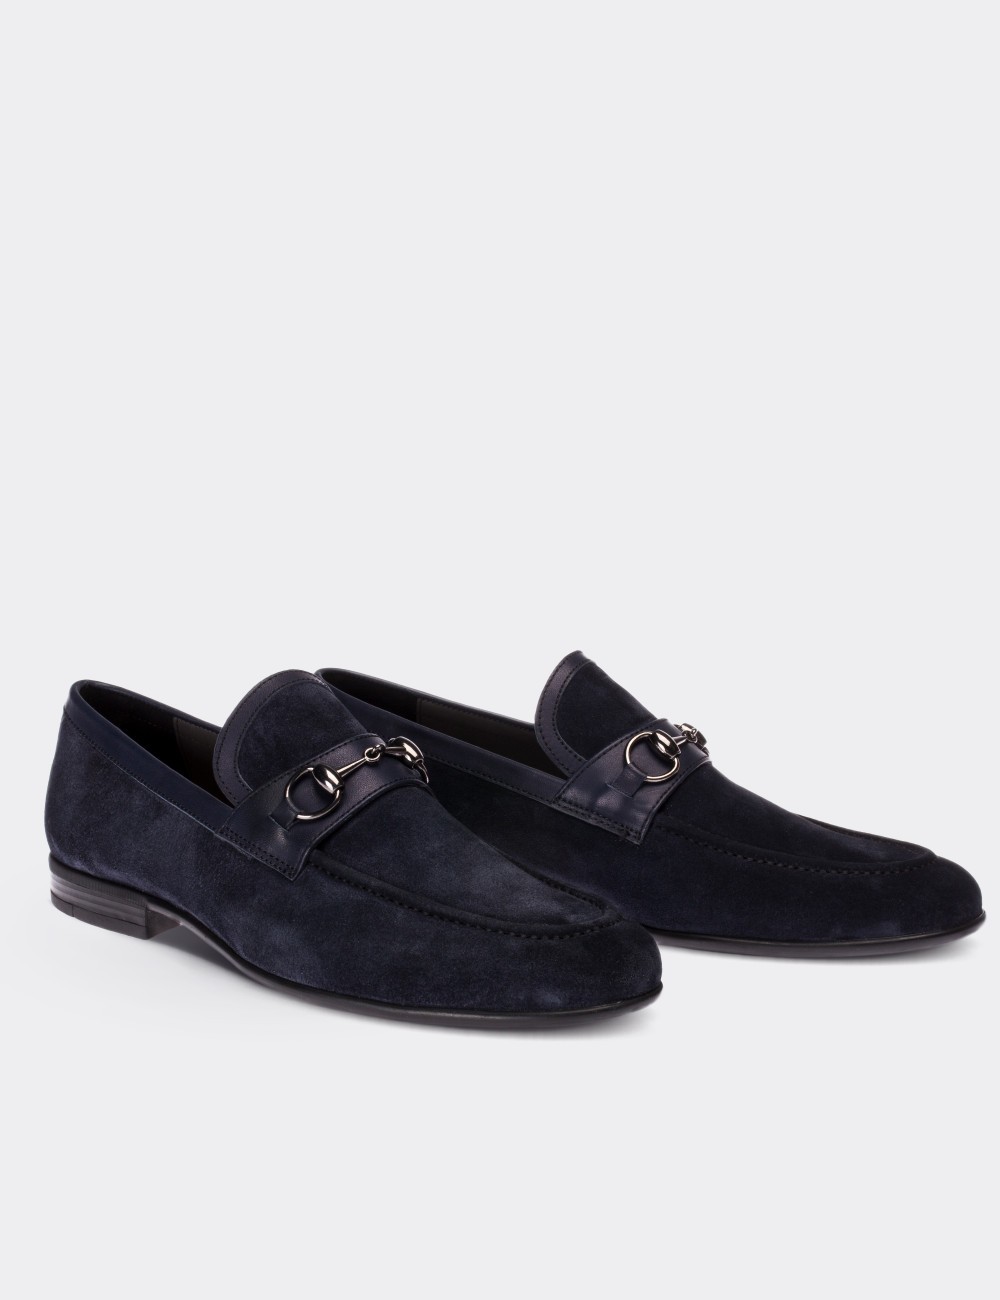 Navy Suede Leather Loafers - 01712MLCVC01